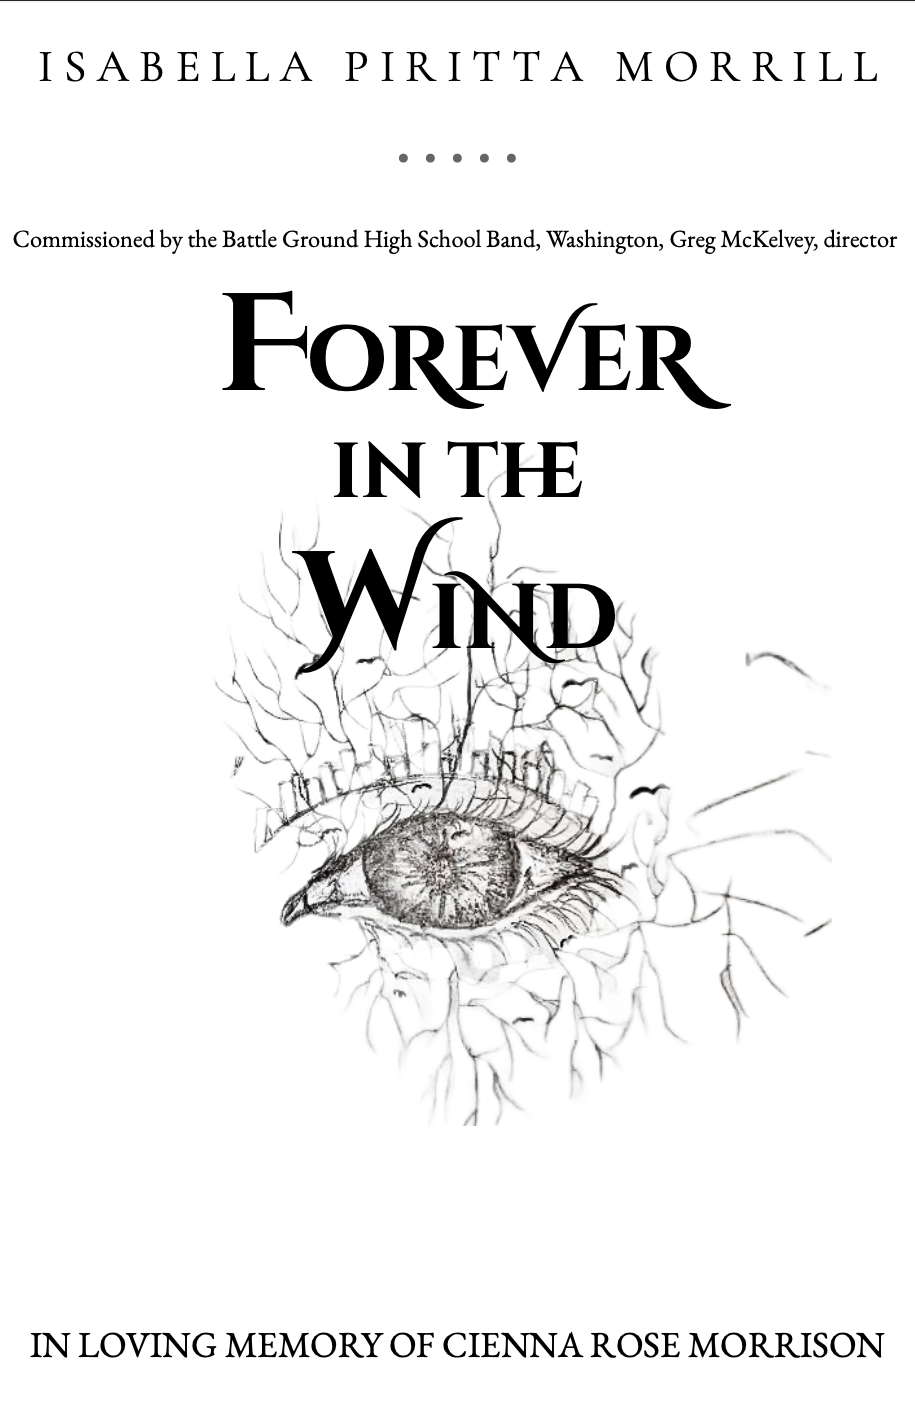 Forever In The Wind (Score Only) by Isabella Piritta Morrill